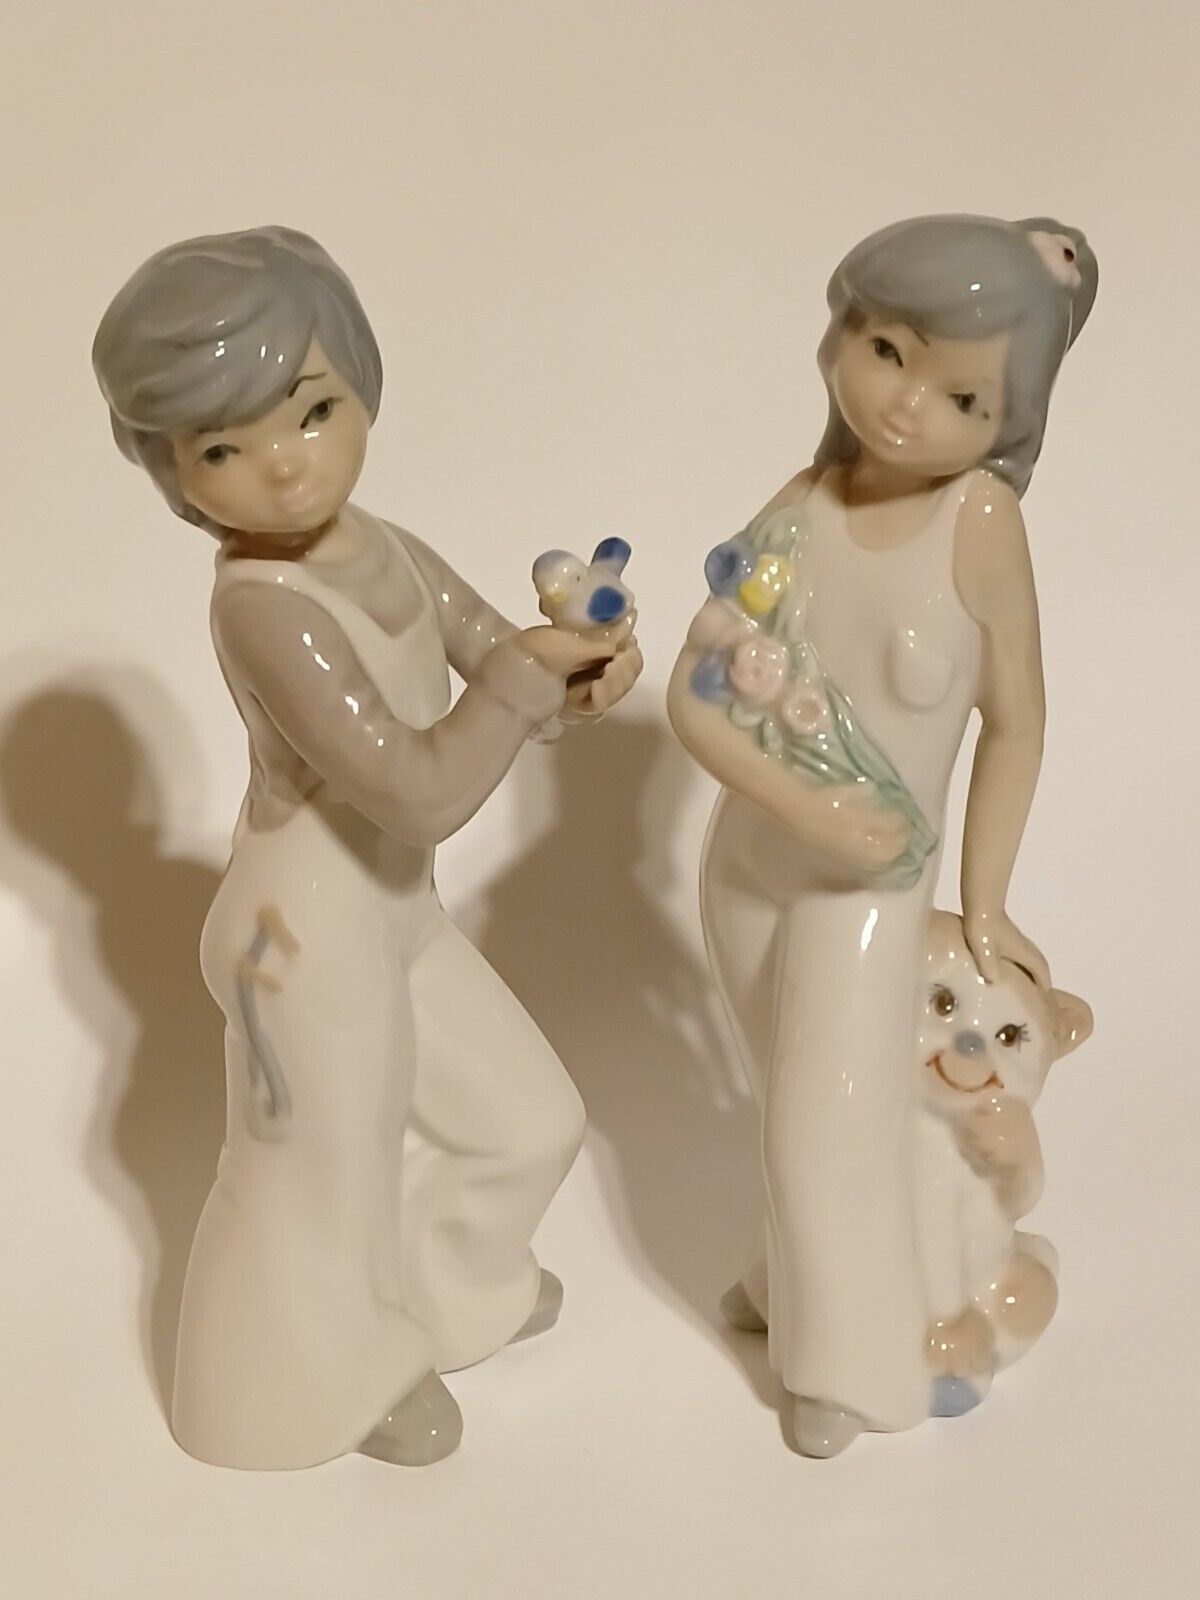 Vintage Cascades Set of 2 Made in Spain Porcelain Figurines Lladro Style